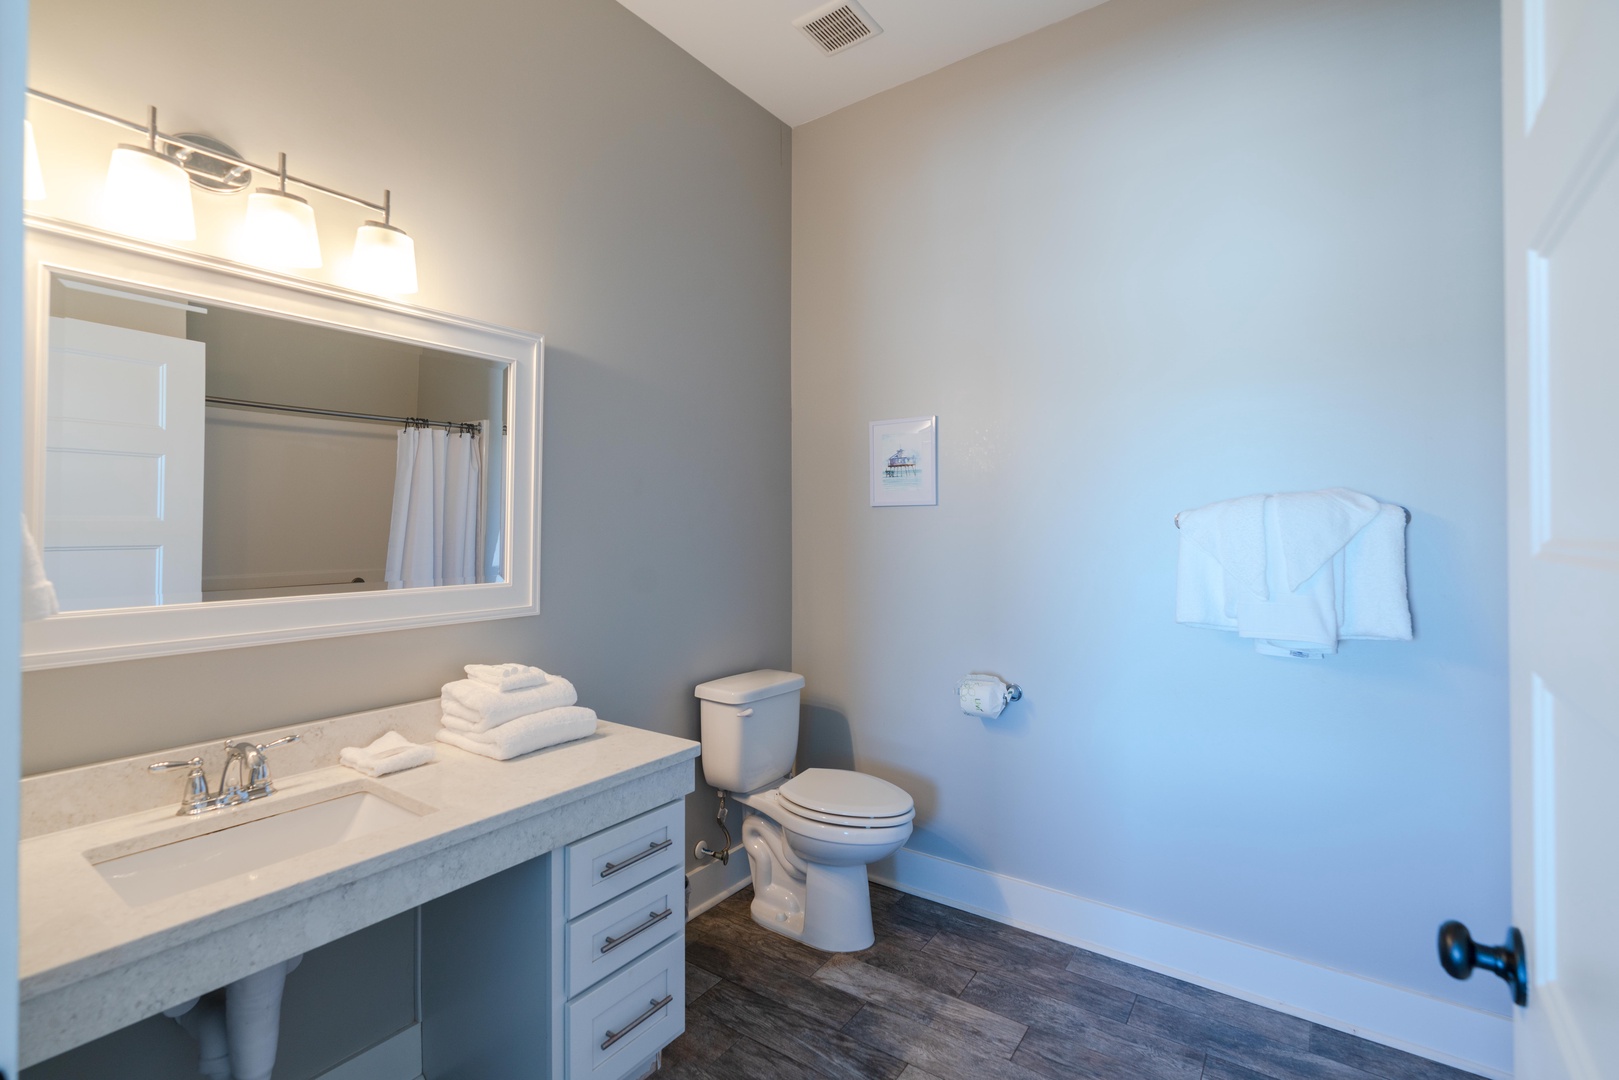 Master bath with walk-in shower and handicap accessible bars